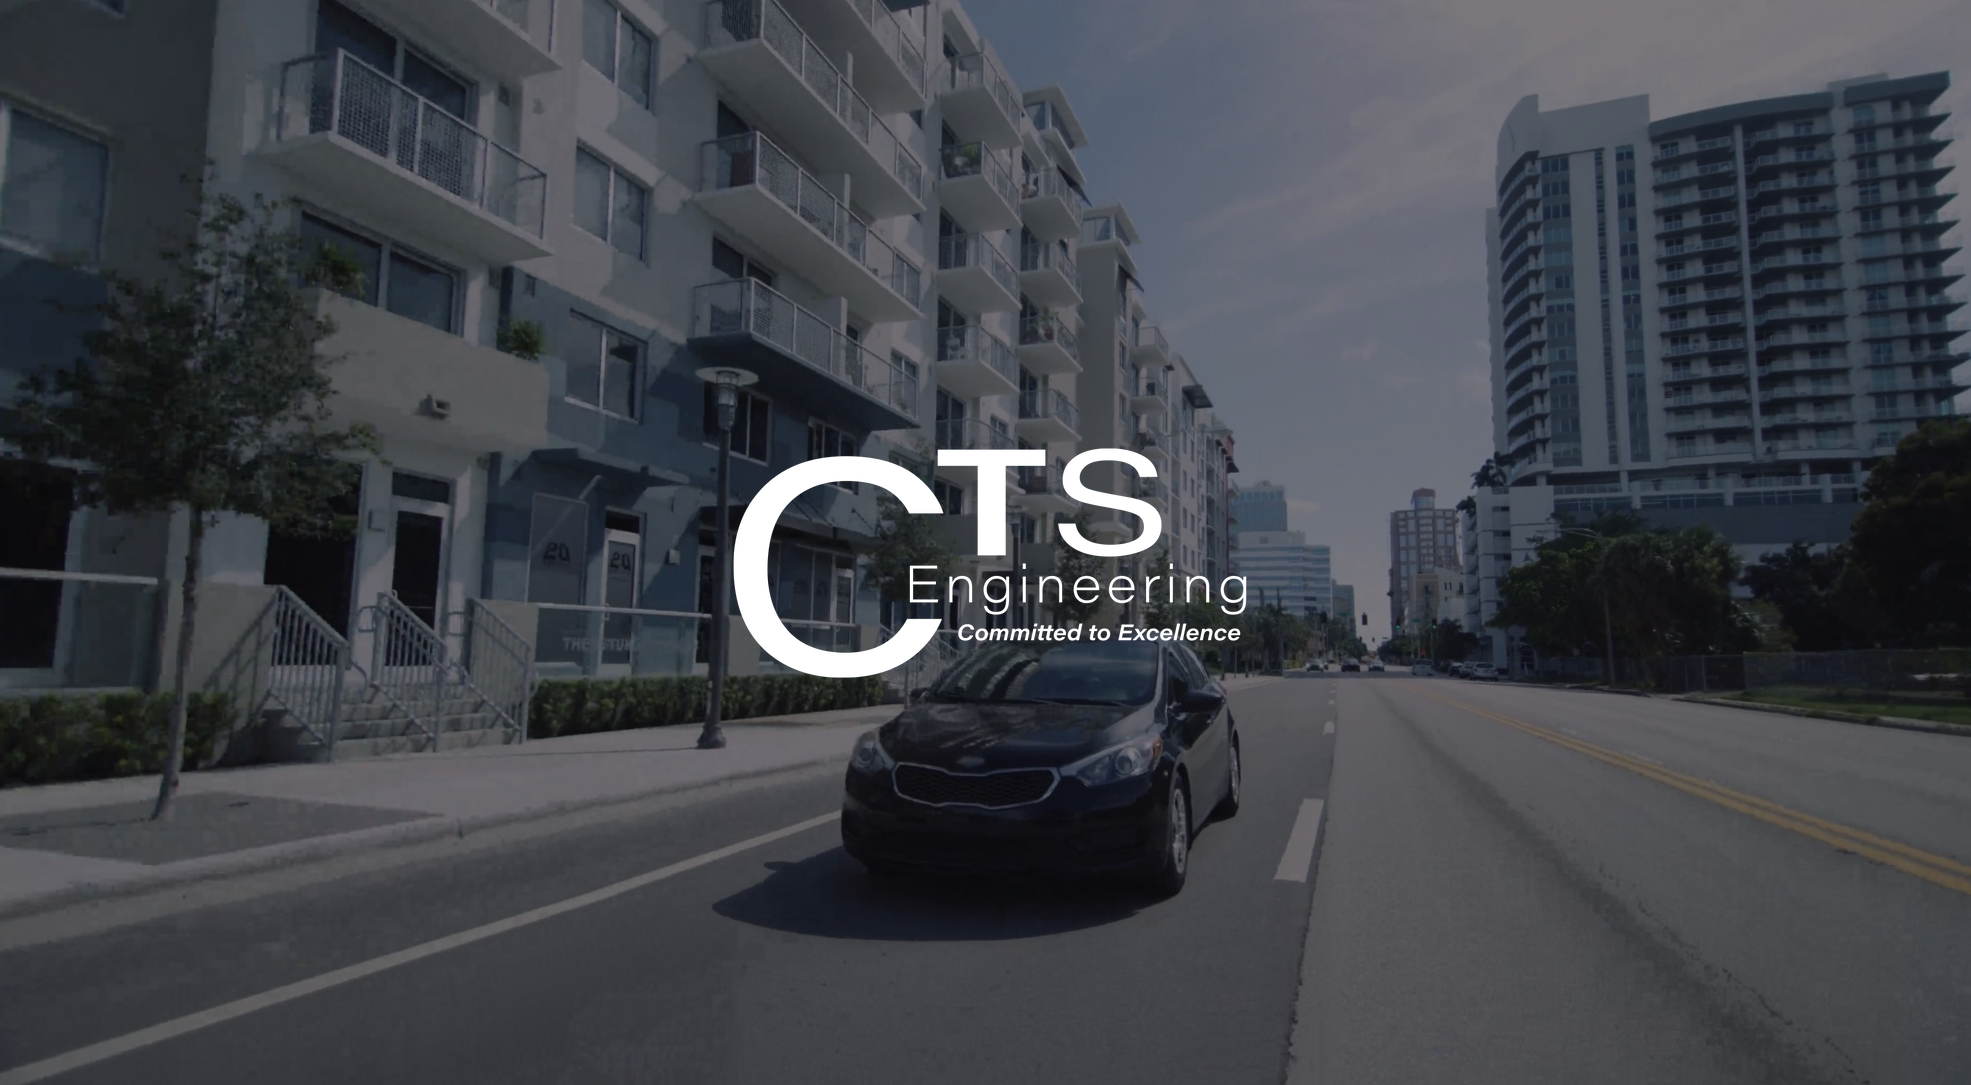 White CTS Engineering Committed to Excellence logo with dimmed background view from front of a black car driving down a road in a city